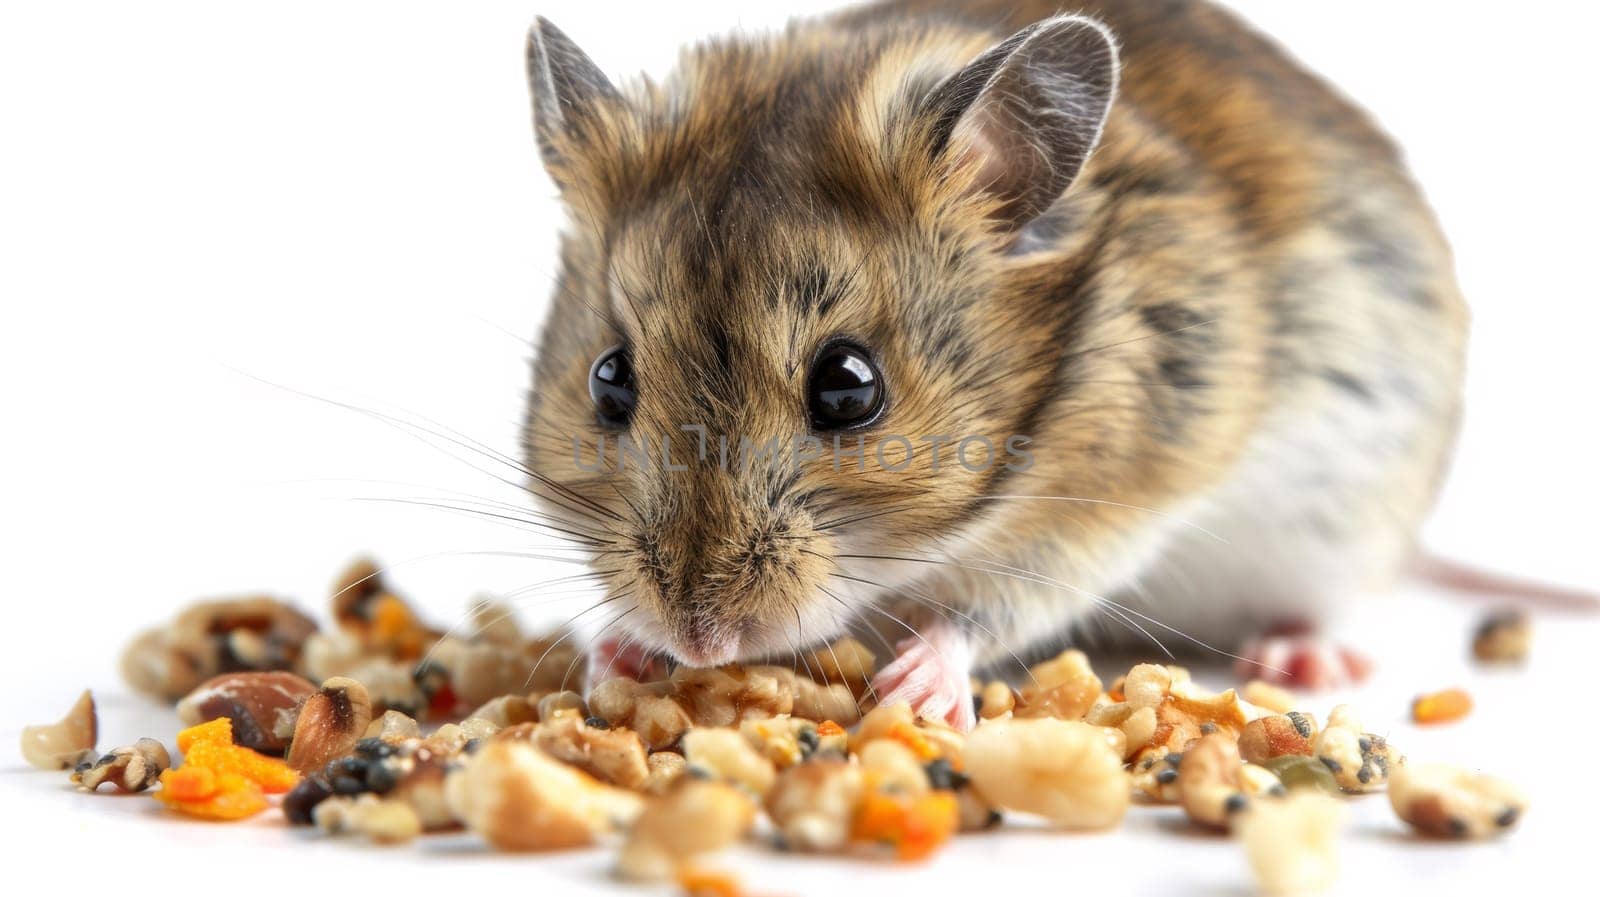 A mouse eating a pile of food on the ground